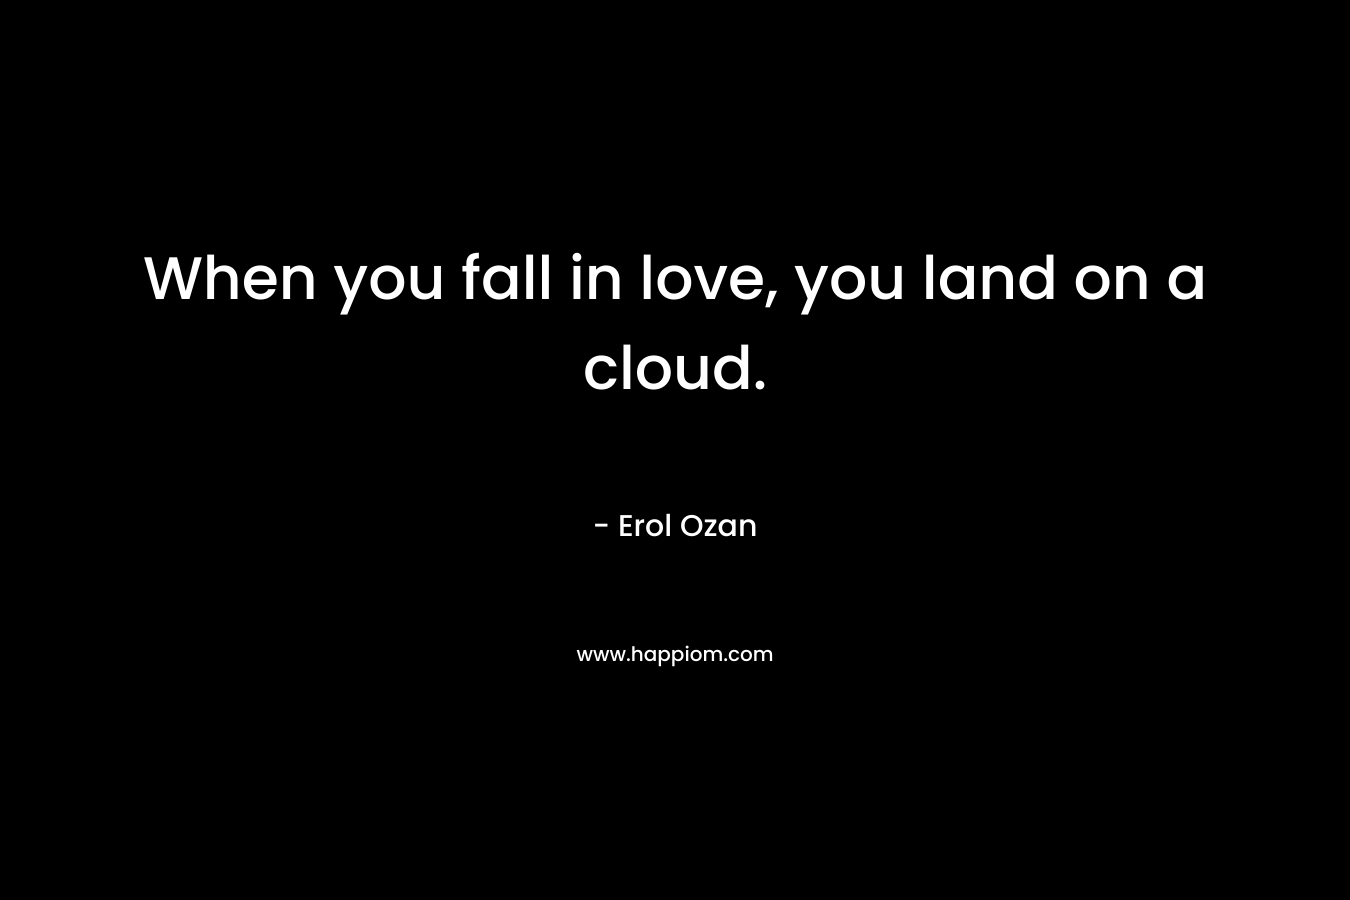 When you fall in love, you land on a cloud. – Erol Ozan